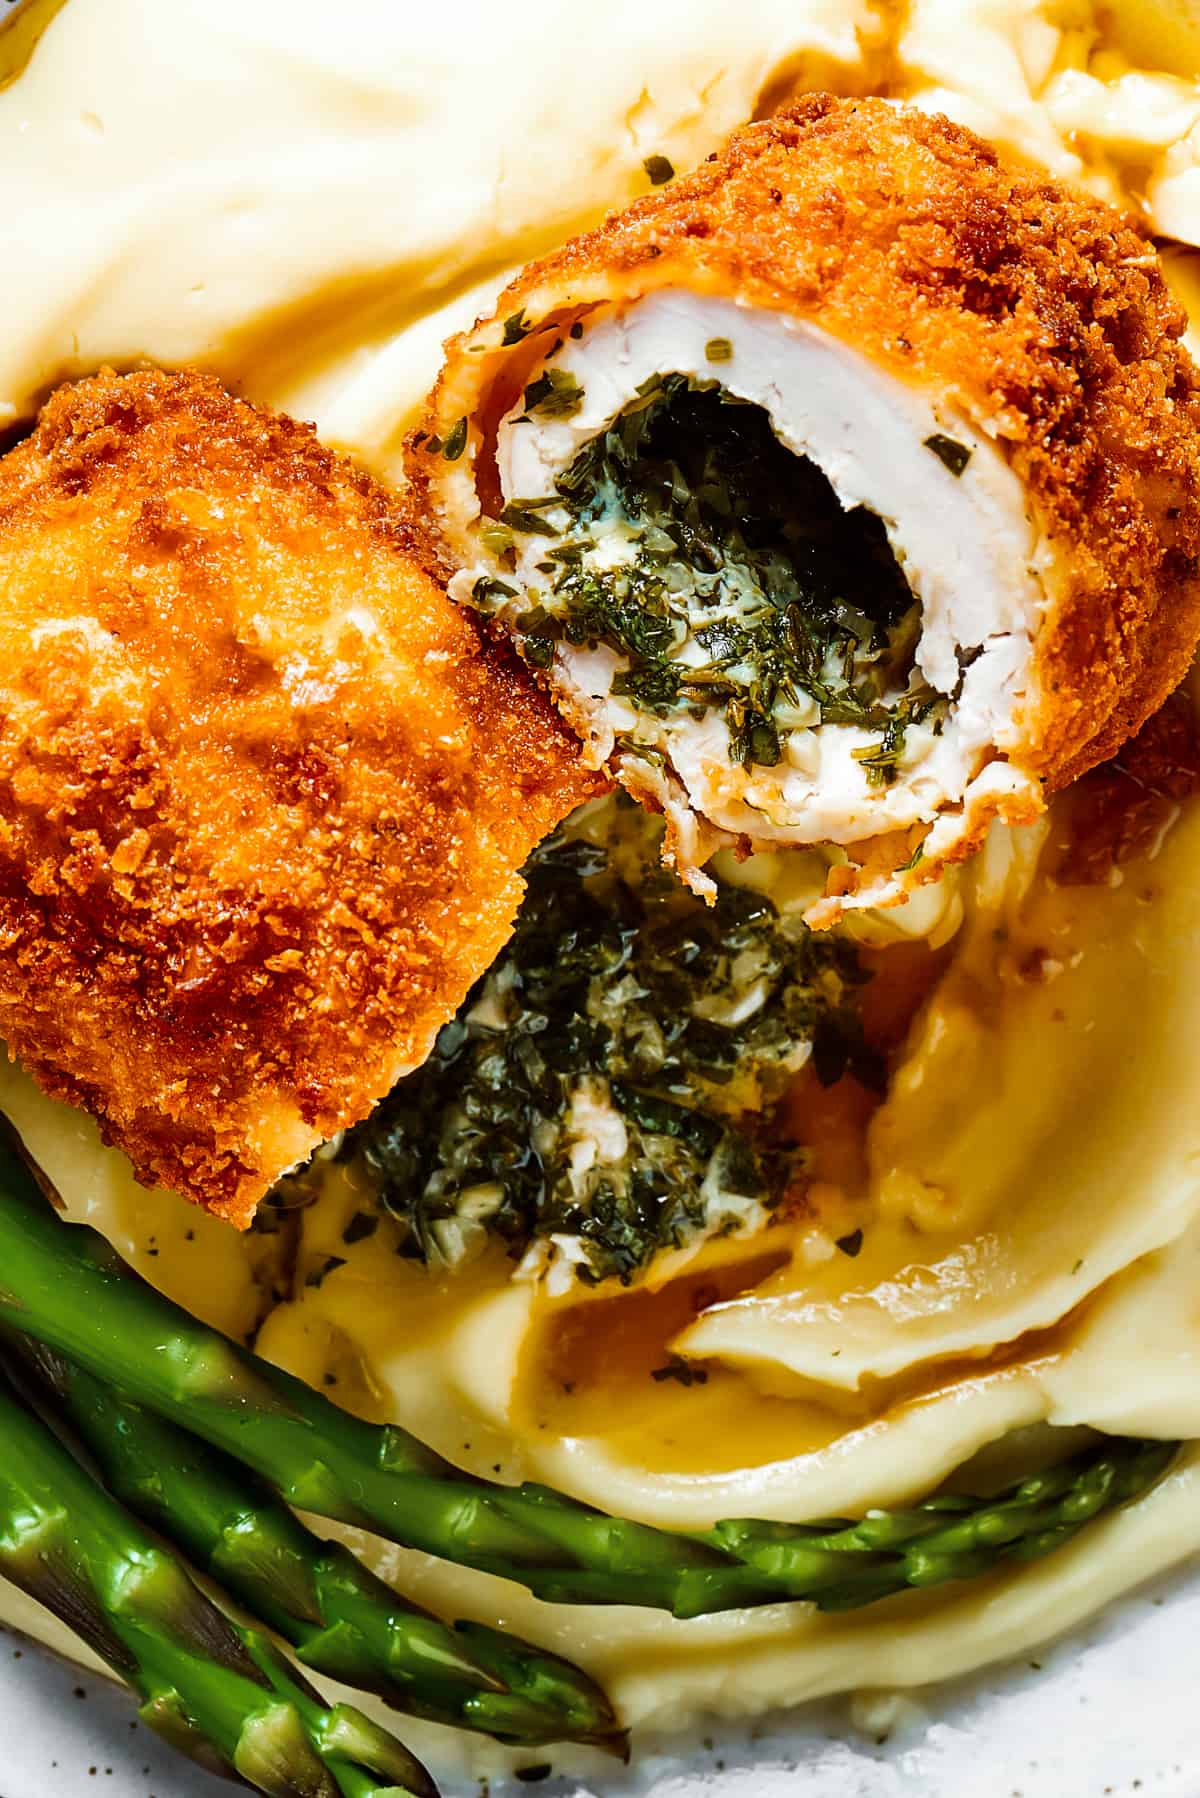 A serving of chicken Kiev cut in half to show the buttery filling.